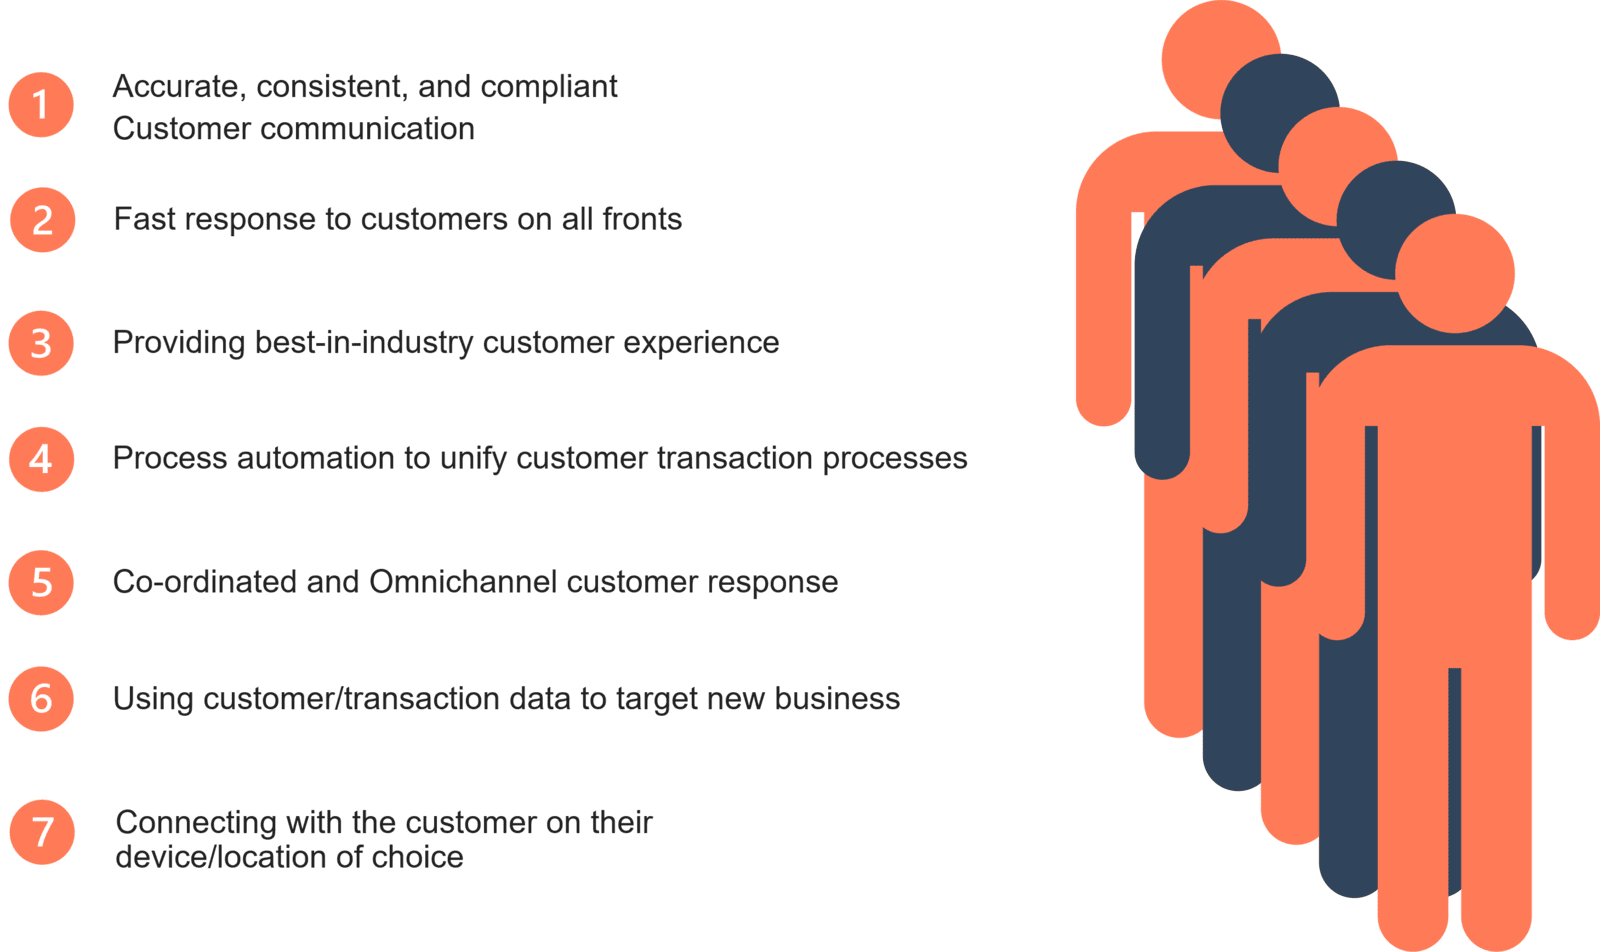 Elements of smart CX strategy